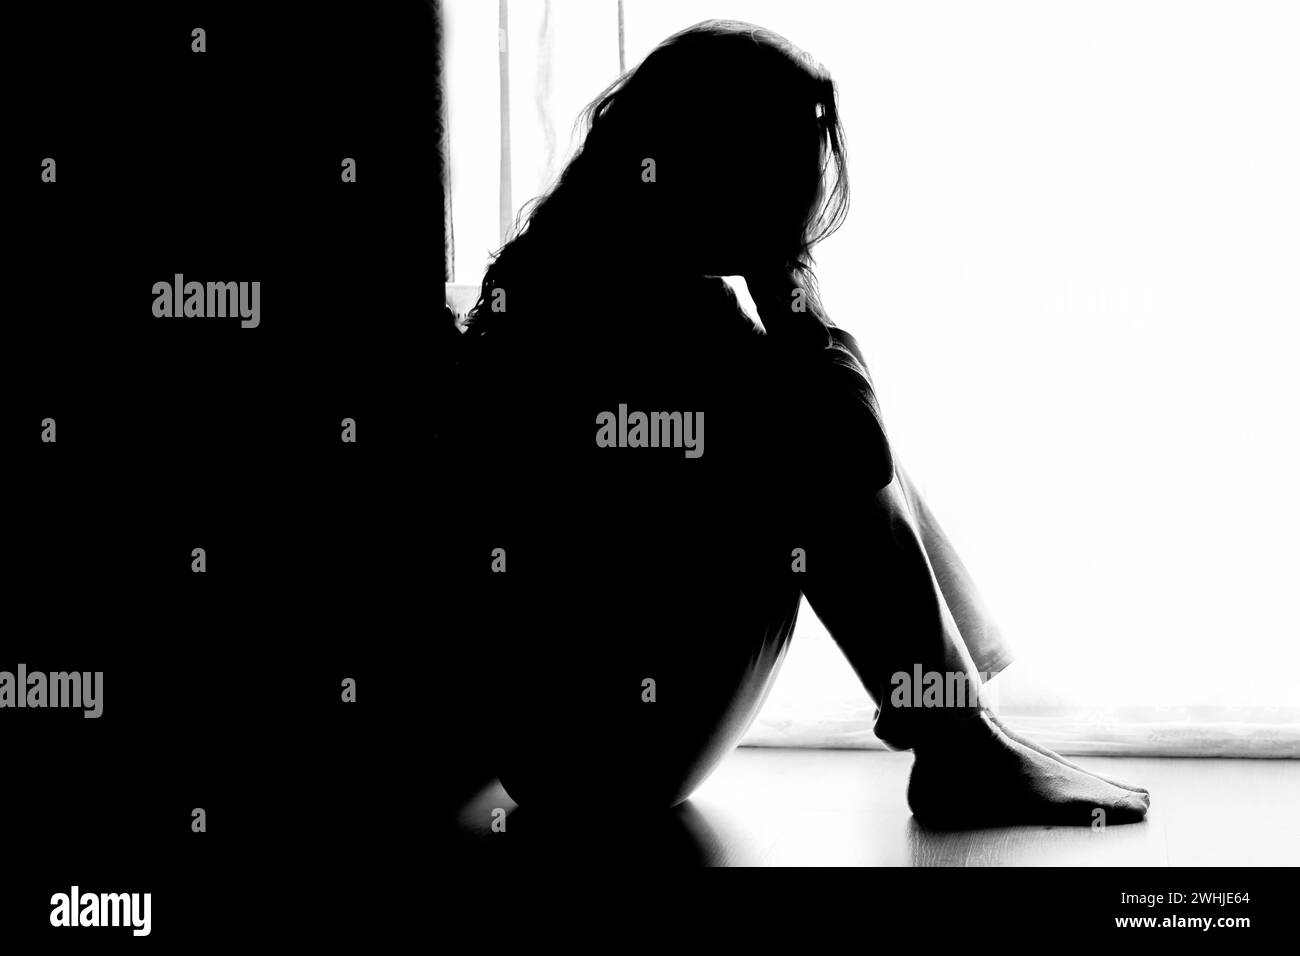 Unhappy mature lady, woman in silhouette, sitting on the floor with back lit. Depressing thoughts. Stock Photo